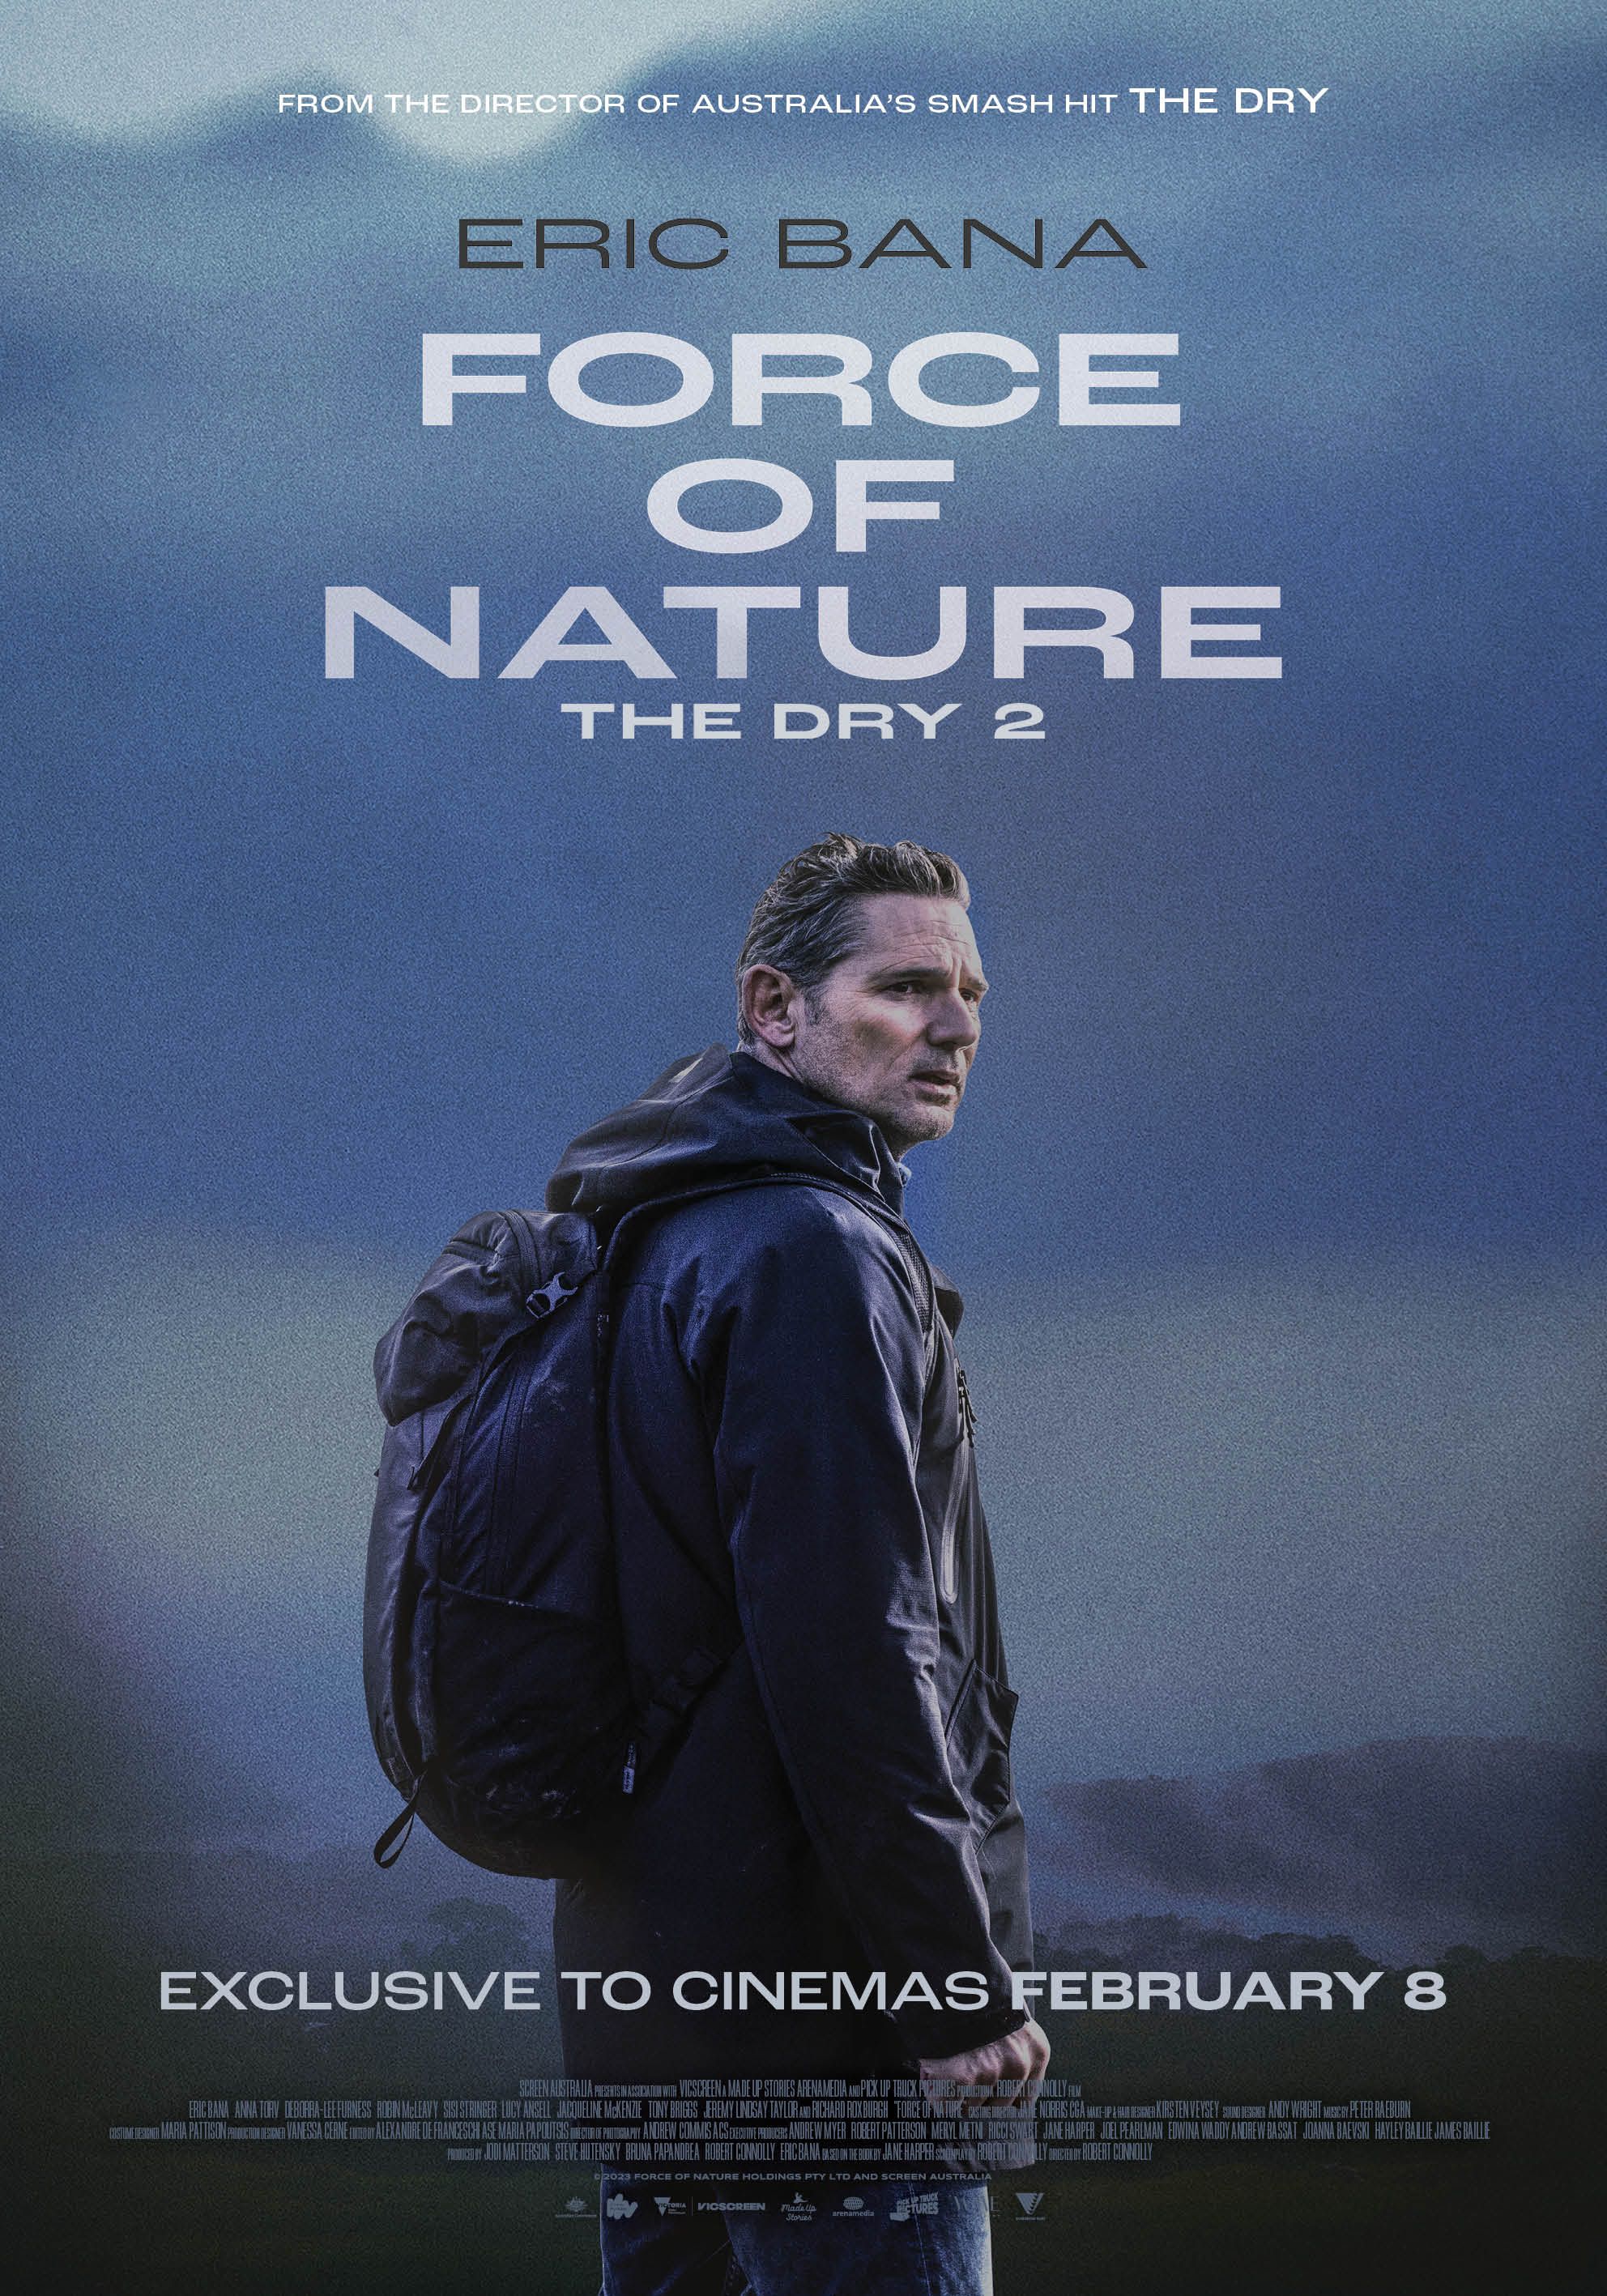 Force of Nature The Dry 2 Film Poster